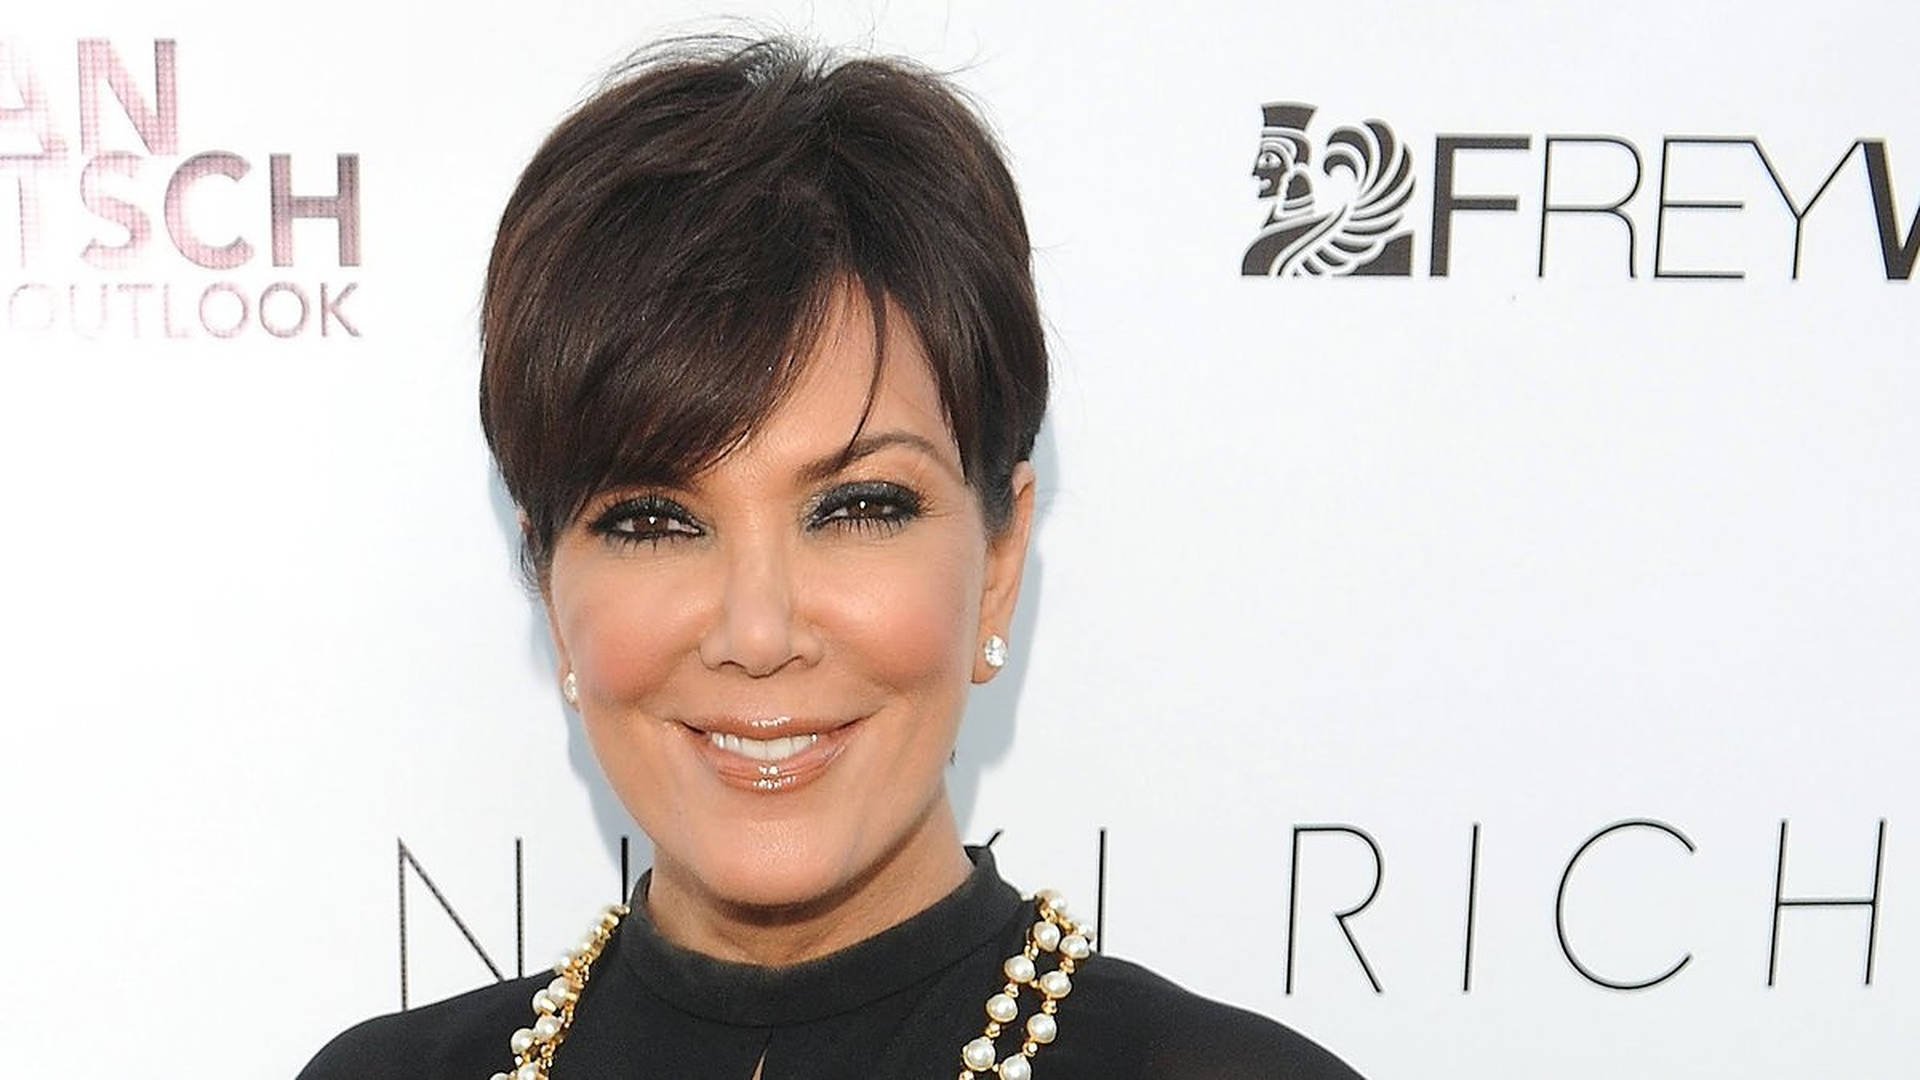 Kris Jenner With Pearls